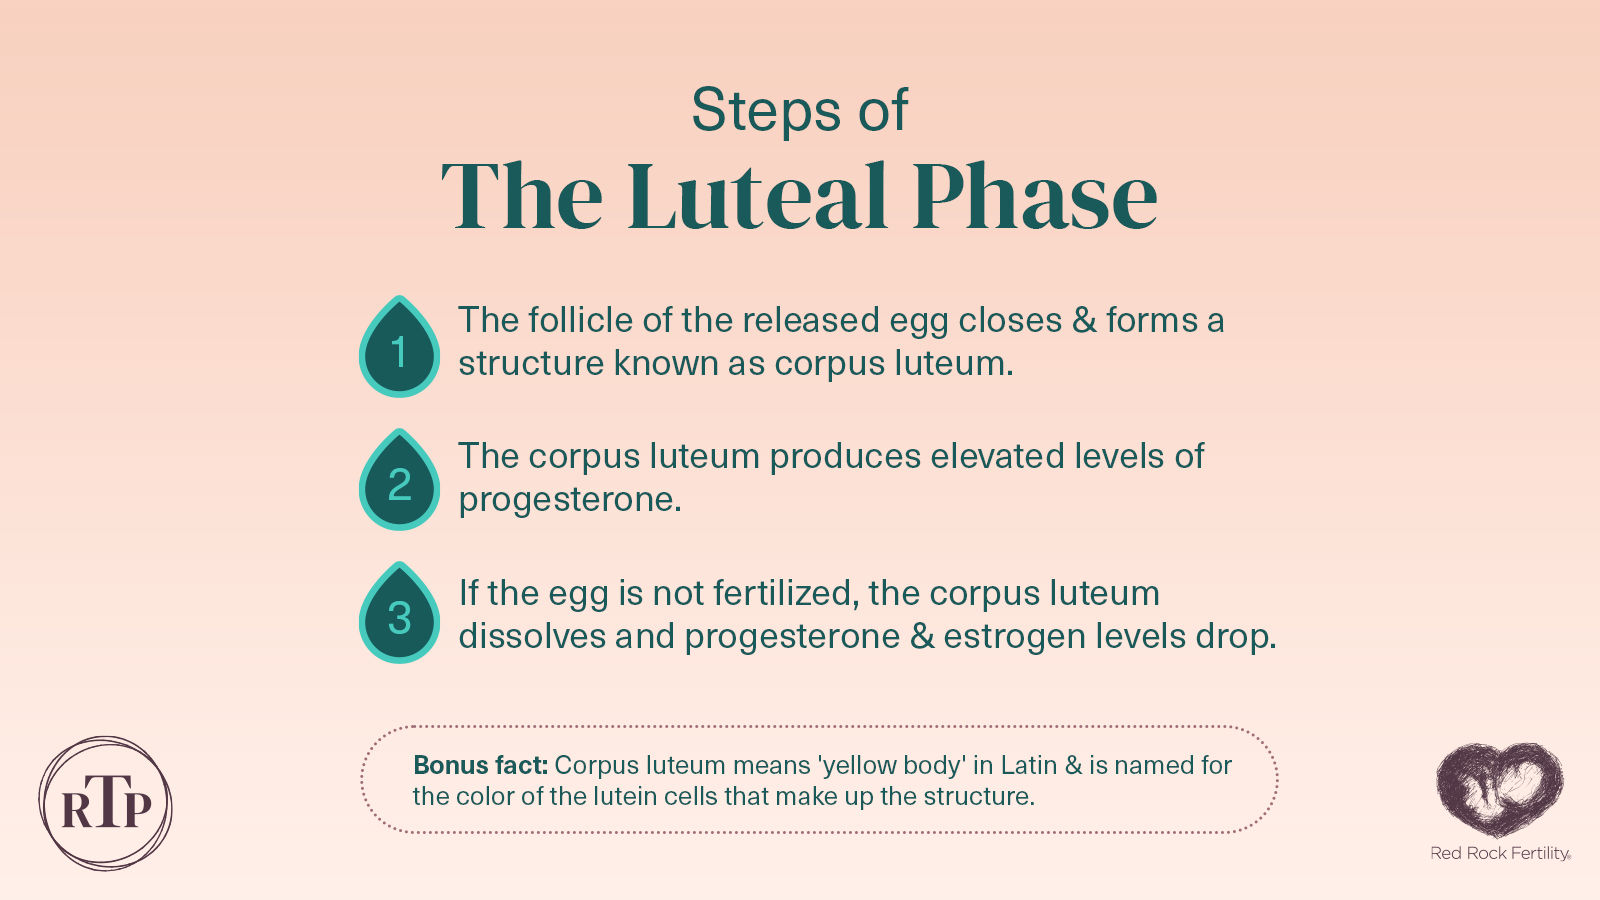 Red Rock Fertility on X: In the Luteal Phase, increased estrogen